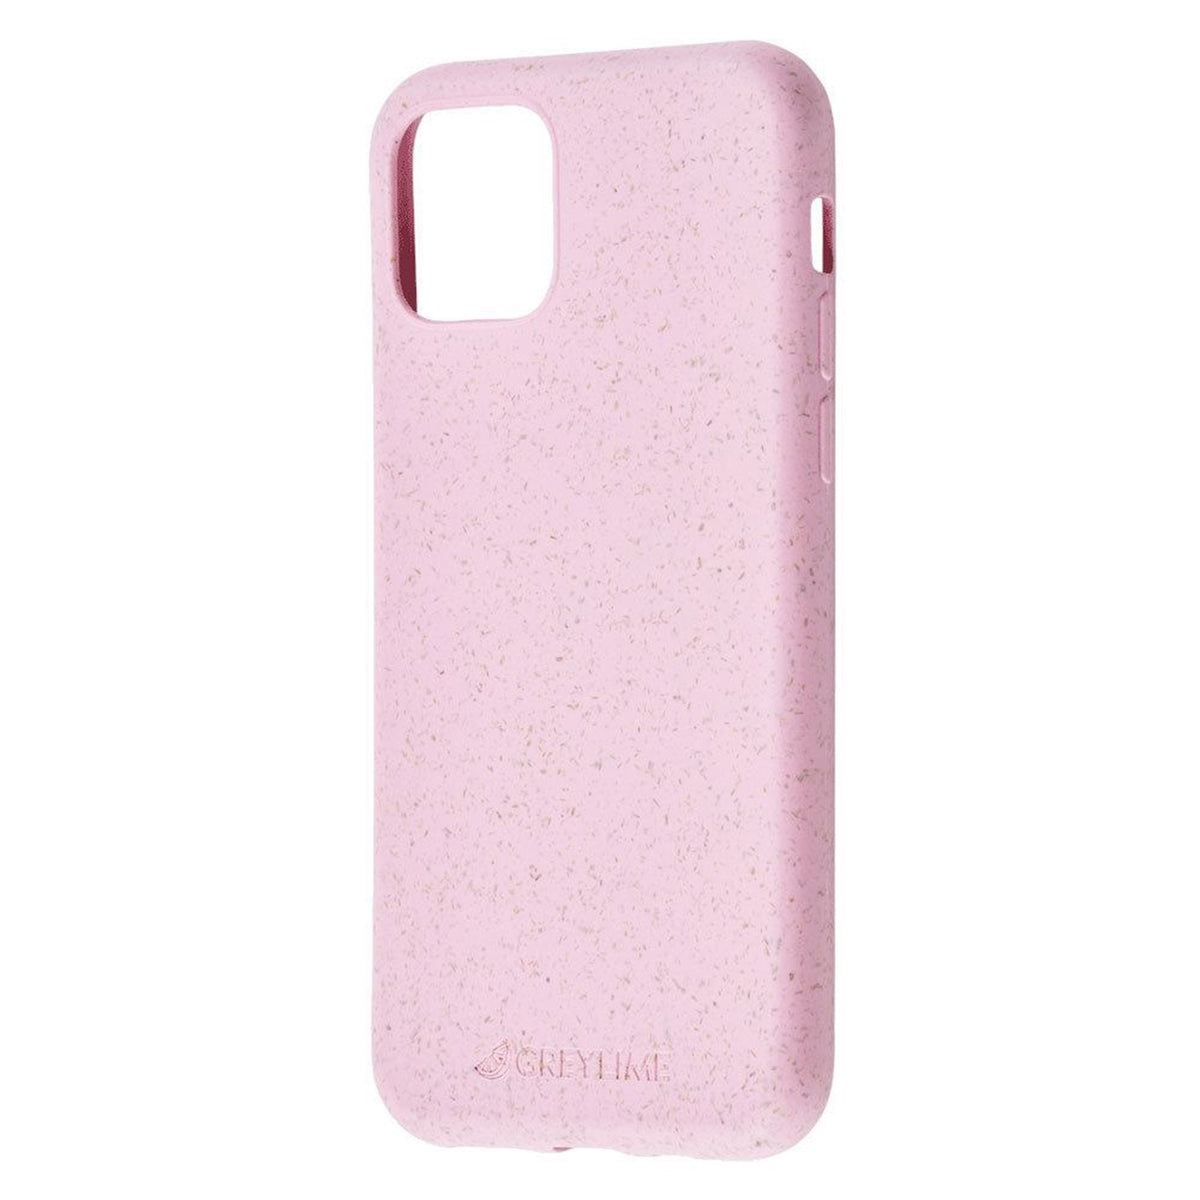 GreyLime-iPhone-11-Pro-biodegradable-cover-Pink-COIP11P05-V2.jpg